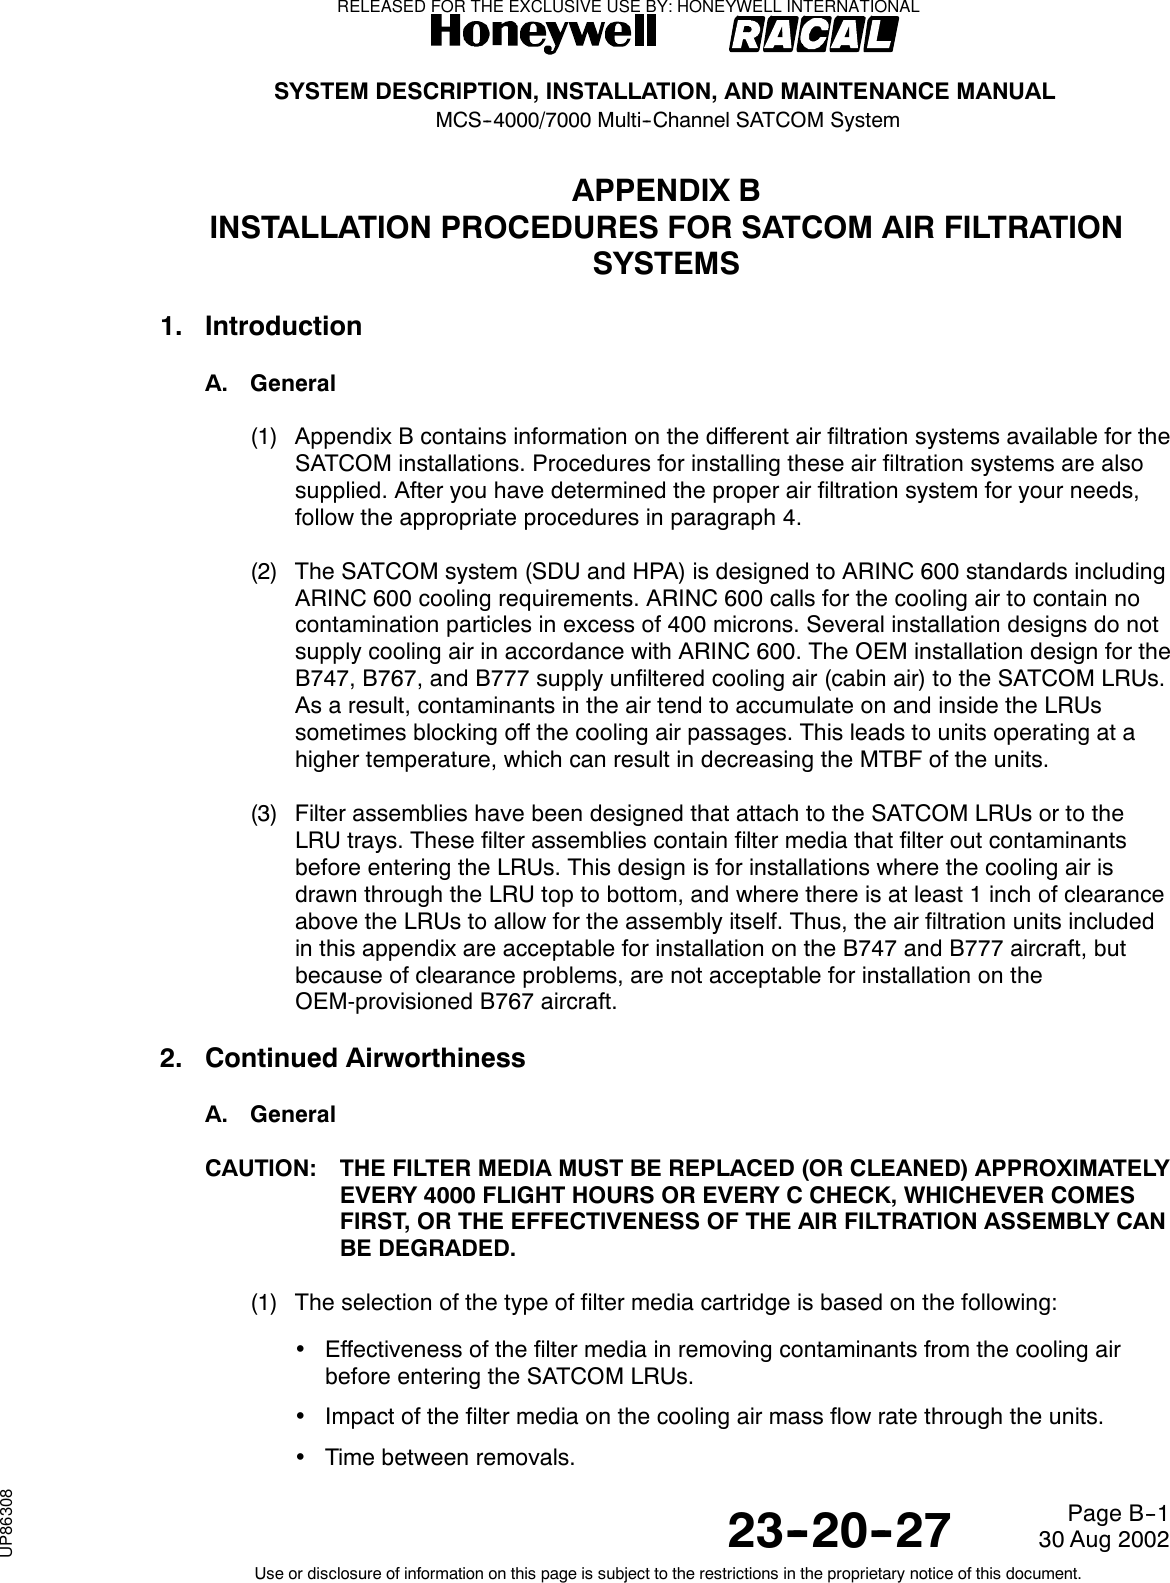 SYSTEM DESCRIPTION, INSTALLATION, AND MAINTENANCE MANUALMCS--4000/7000 Multi--Channel SATCOM System23--20--2730 Aug 2002Use or disclosure of information on this page is subject to the restrictions in the proprietary notice of this document.Page B--1APPENDIX BINSTALLATION PROCEDURES FOR SATCOM AIR FILTRATIONSYSTEMS1. IntroductionA. General(1) Appendix B contains information on the different air filtration systems available for theSATCOM installations. Procedures for installing these air filtration systems are alsosupplied. After you have determined the proper air filtration system for your needs,follow the appropriate procedures in paragraph 4.(2) The SATCOM system (SDU and HPA) is designed to ARINC 600 standards includingARINC 600 cooling requirements. ARINC 600 calls for the cooling air to contain nocontamination particles in excess of 400 microns. Several installation designs do notsupply cooling air in accordance with ARINC 600. The OEM installation design for theB747, B767, and B777 supply unfiltered cooling air (cabin air) to the SATCOM LRUs.As a result, contaminants in the air tend to accumulate on and inside the LRUssometimes blocking off the cooling air passages. This leads to units operating at ahigher temperature, which can result in decreasing the MTBF of the units.(3) Filter assemblies have been designed that attach to the SATCOM LRUs or to theLRU trays. These filter assemblies contain filter media that filter out contaminantsbefore entering the LRUs. This design is for installations where the cooling air isdrawn through the LRU top to bottom, and where there is at least 1 inch of clearanceabove the LRUs to allow for the assembly itself. Thus, the air filtration units includedin this appendix are acceptable for installation on the B747 and B777 aircraft, butbecause of clearance problems, are not acceptable for installation on theOEM-provisioned B767 aircraft.2. Continued AirworthinessA. GeneralCAUTION: THE FILTER MEDIA MUST BE REPLACED (OR CLEANED) APPROXIMATELYEVERY 4000 FLIGHT HOURS OR EVERY C CHECK, WHICHEVER COMESFIRST, OR THE EFFECTIVENESS OF THE AIR FILTRATION ASSEMBLY CANBE DEGRADED.(1) The selection of the type of filter media cartridge is based on the following:•Effectiveness of the filter media in removing contaminants from the cooling airbefore entering the SATCOM LRUs.•Impact of the filter media on the cooling air mass flow rate through the units.•Time between removals.RELEASED FOR THE EXCLUSIVE USE BY: HONEYWELL INTERNATIONALUP86308